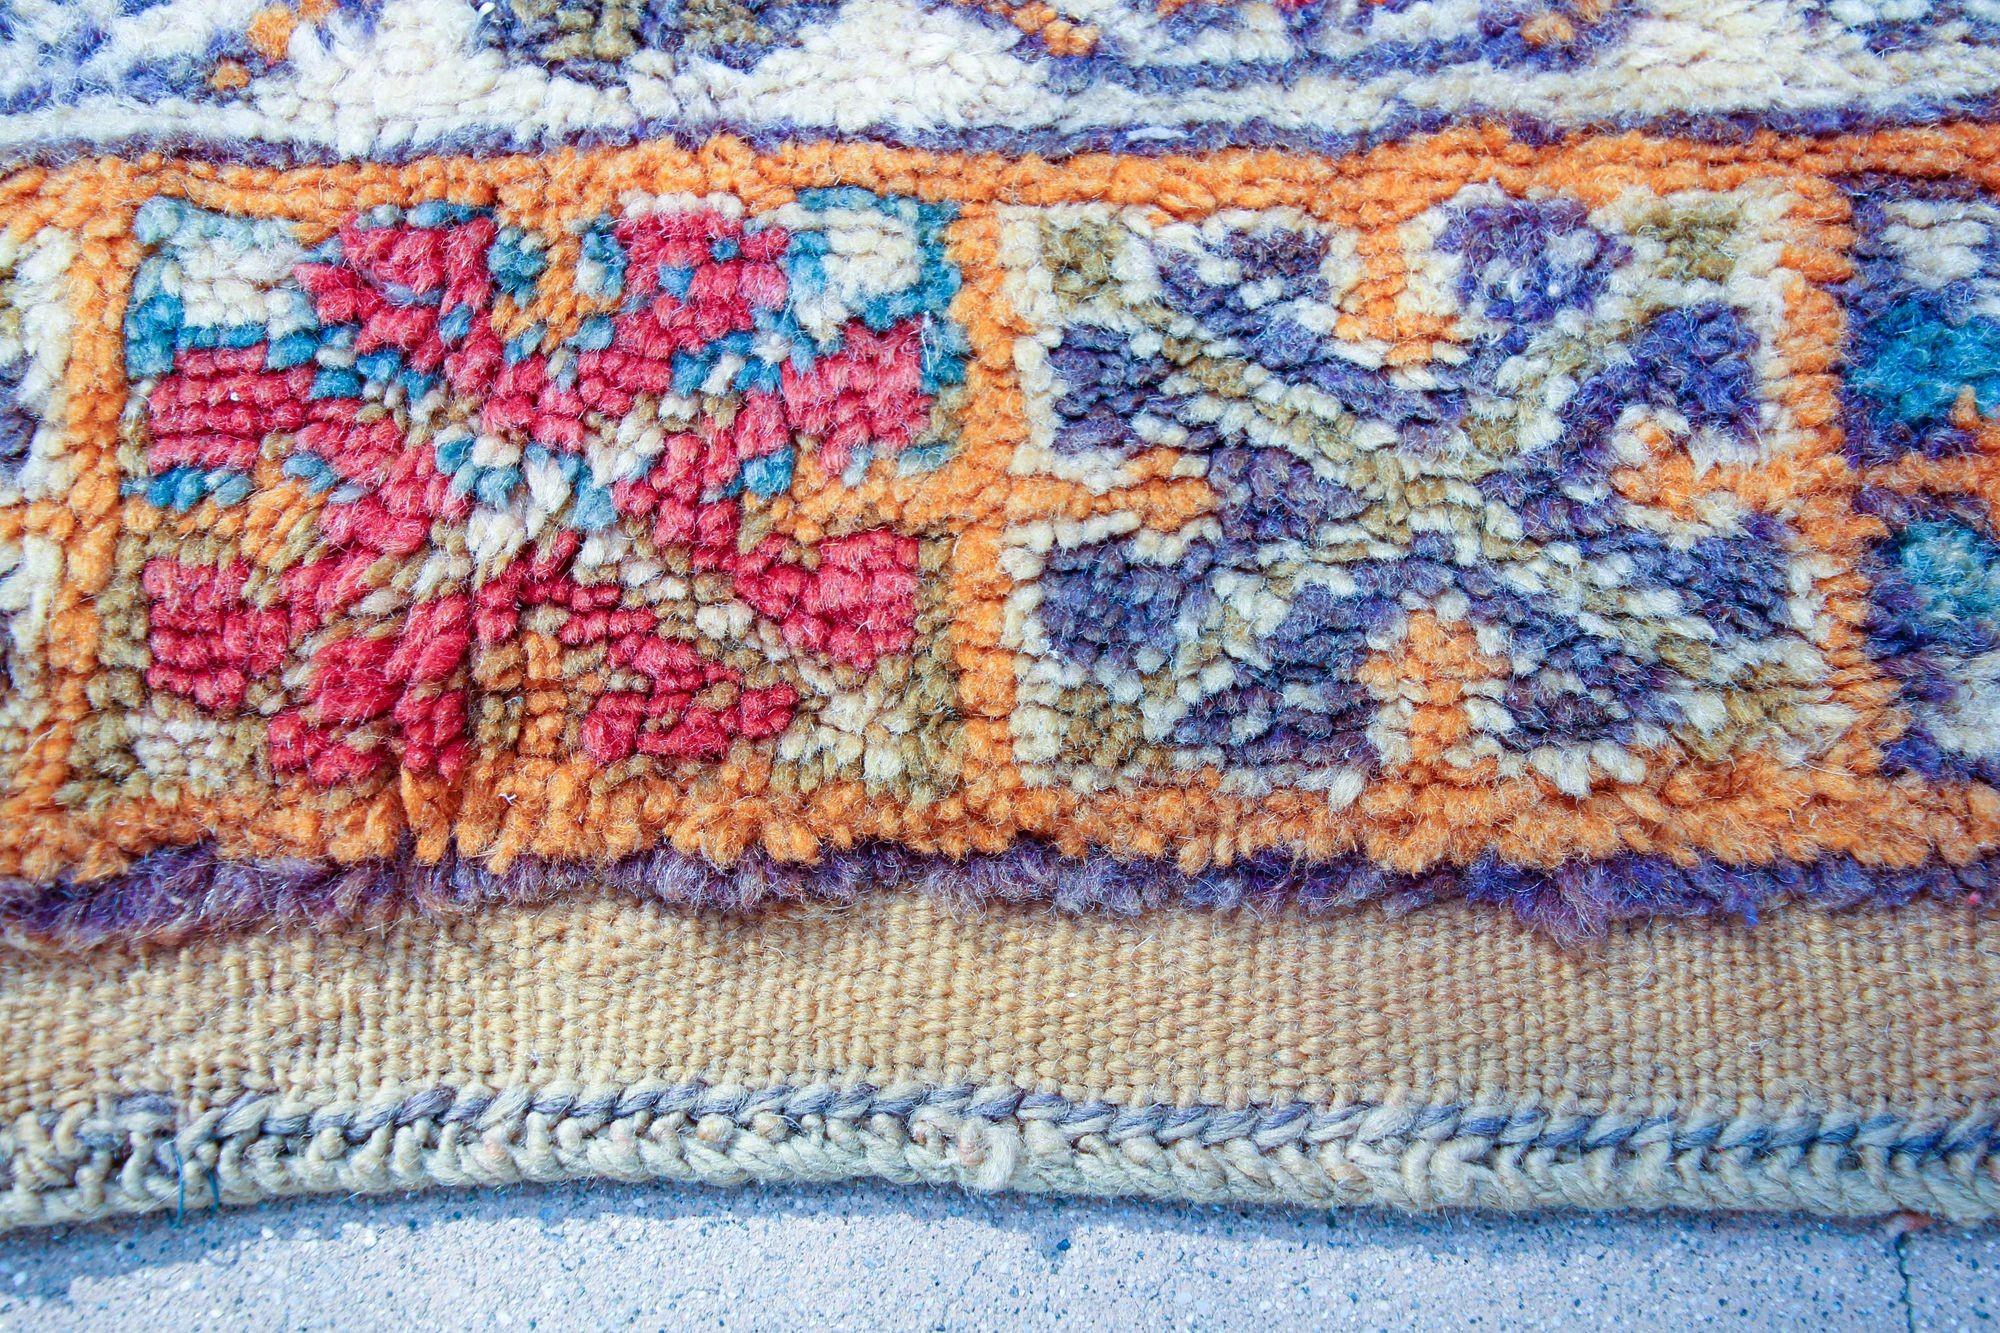 1960s Moroccan Berber Rug Burnt Orange Blue Cream and Pink In Good Condition For Sale In North Hollywood, CA